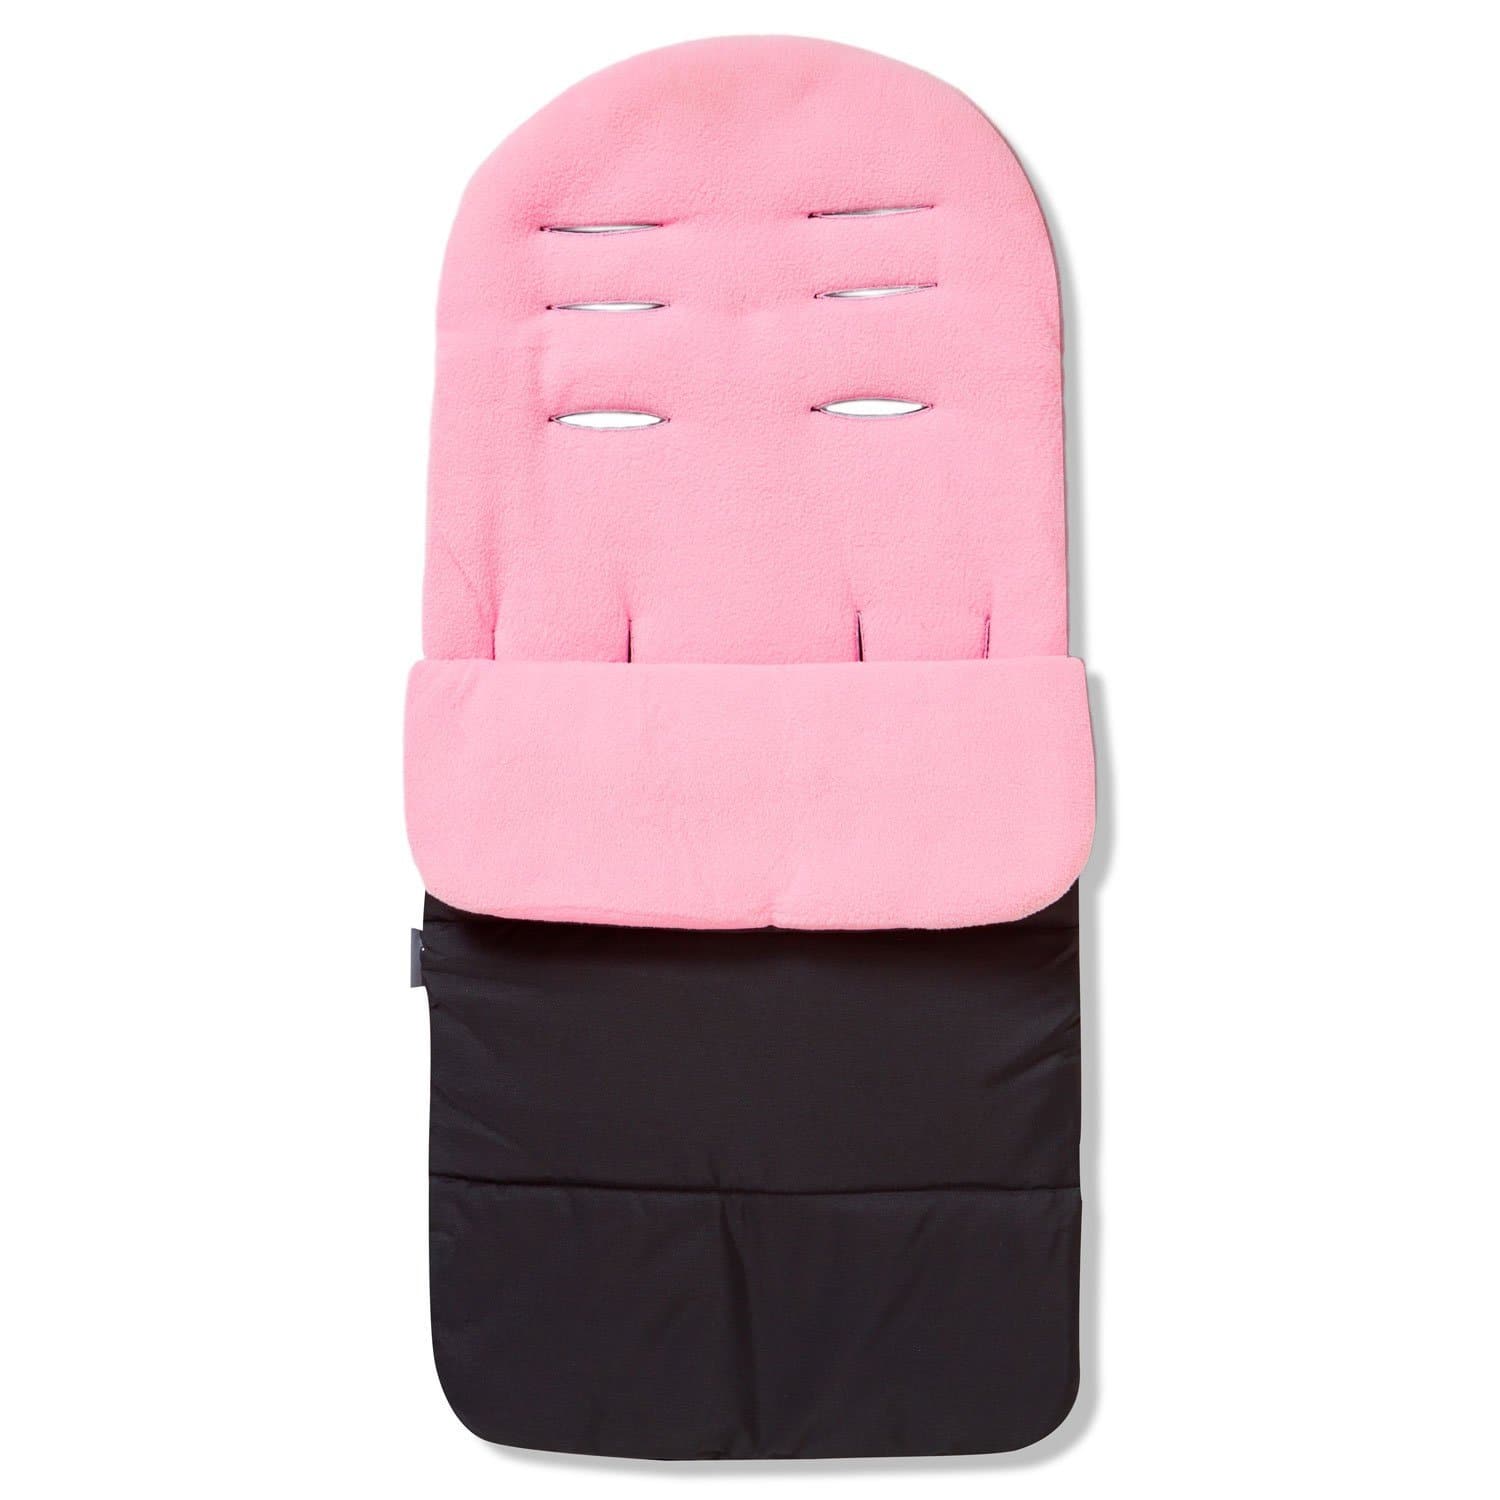 Premium Footmuff / Cosy Toes Compatible with Kiddicare - Candy Pink / Fits All Models | For Your Little One